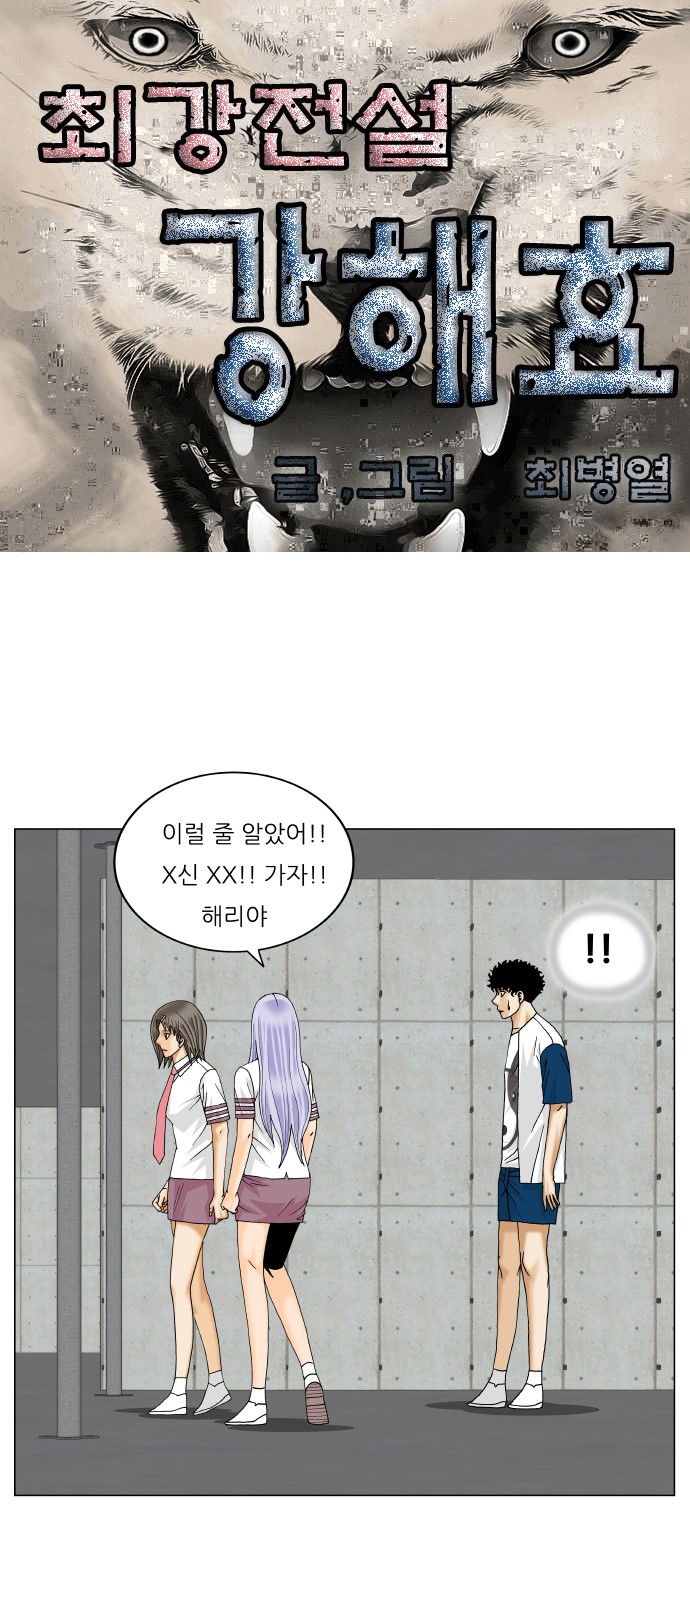 Ultimate Legend - Kang Hae Hyo - Chapter 353 - Page 1